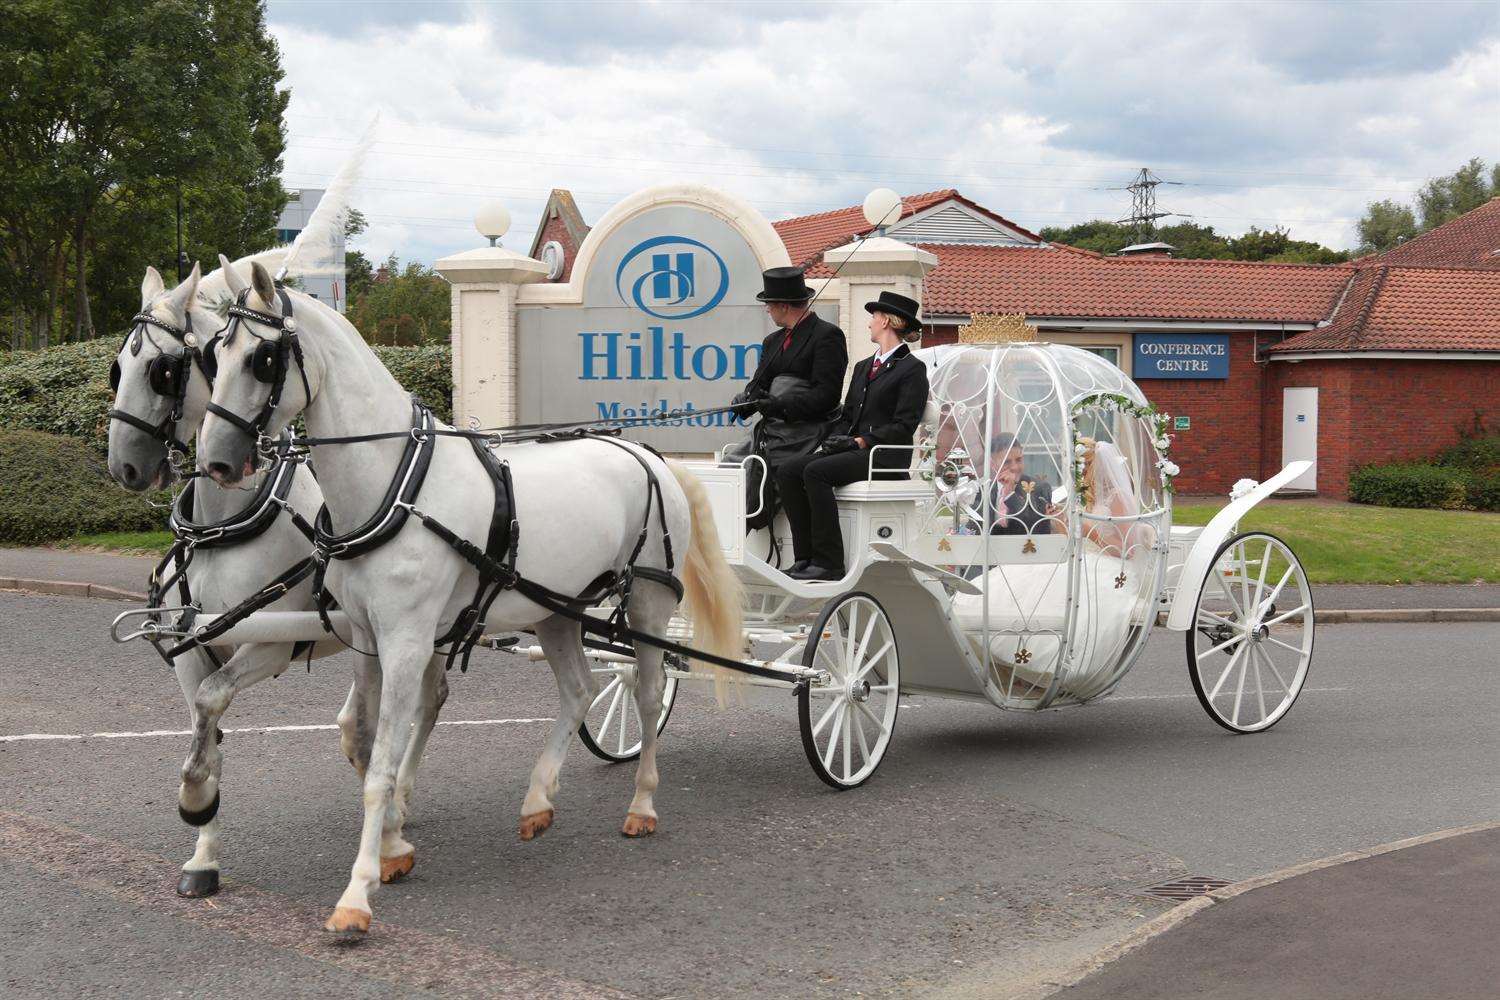 The glass carriage, led by two white horses